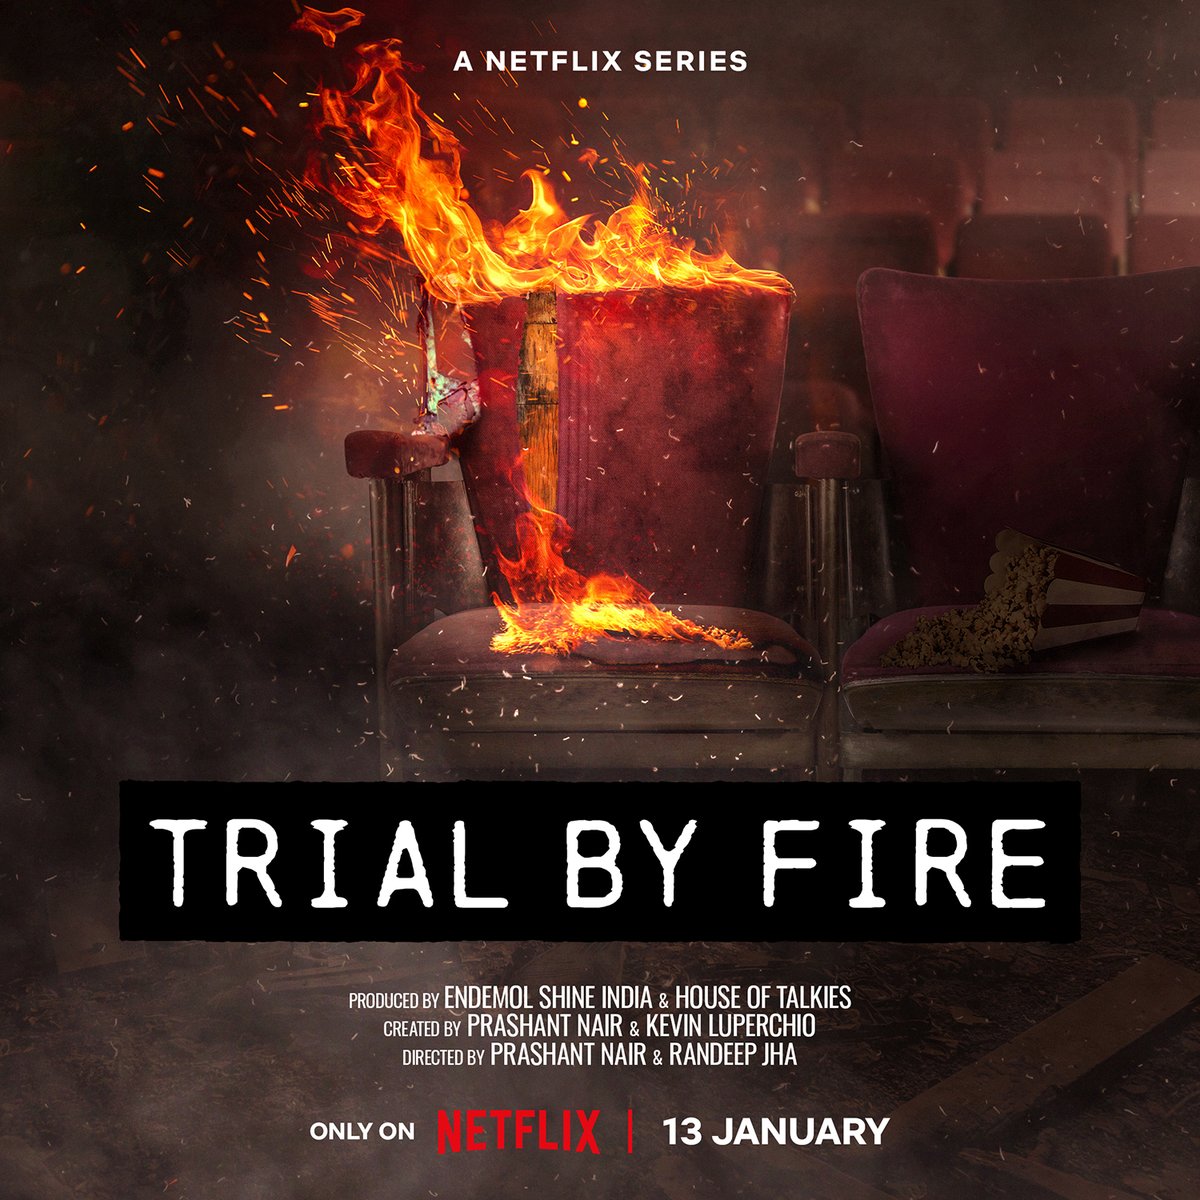 Catch the difficult yet resilient journey of two parents - Neelam and Shekhar Krishnamoorthy, seeking justice over the last two decades, in #TrialByFire on 13th January.